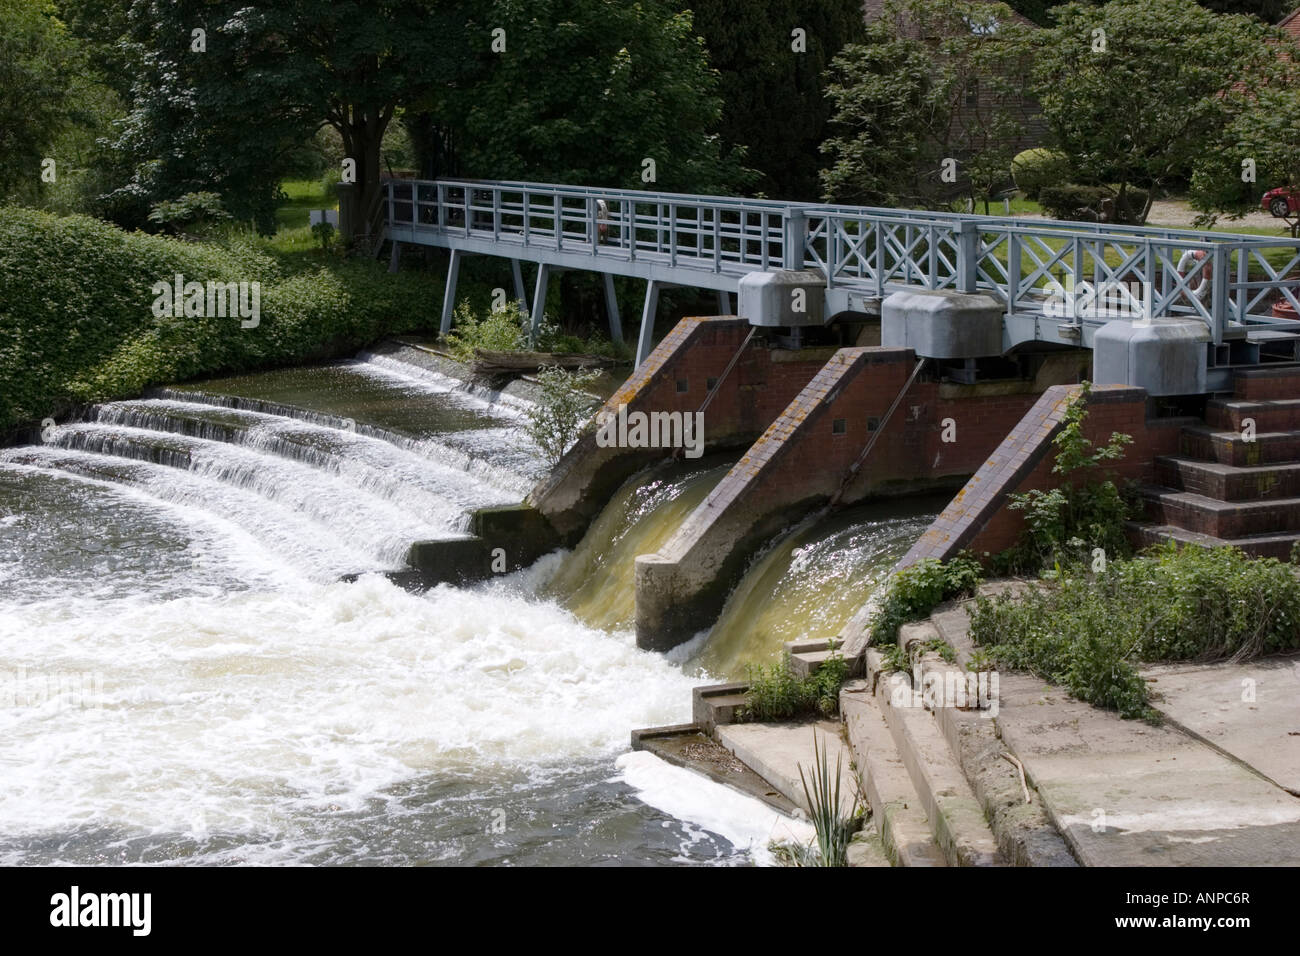 Weir and sluice gate on the River Thames at Goring and Streatley Stock Photo